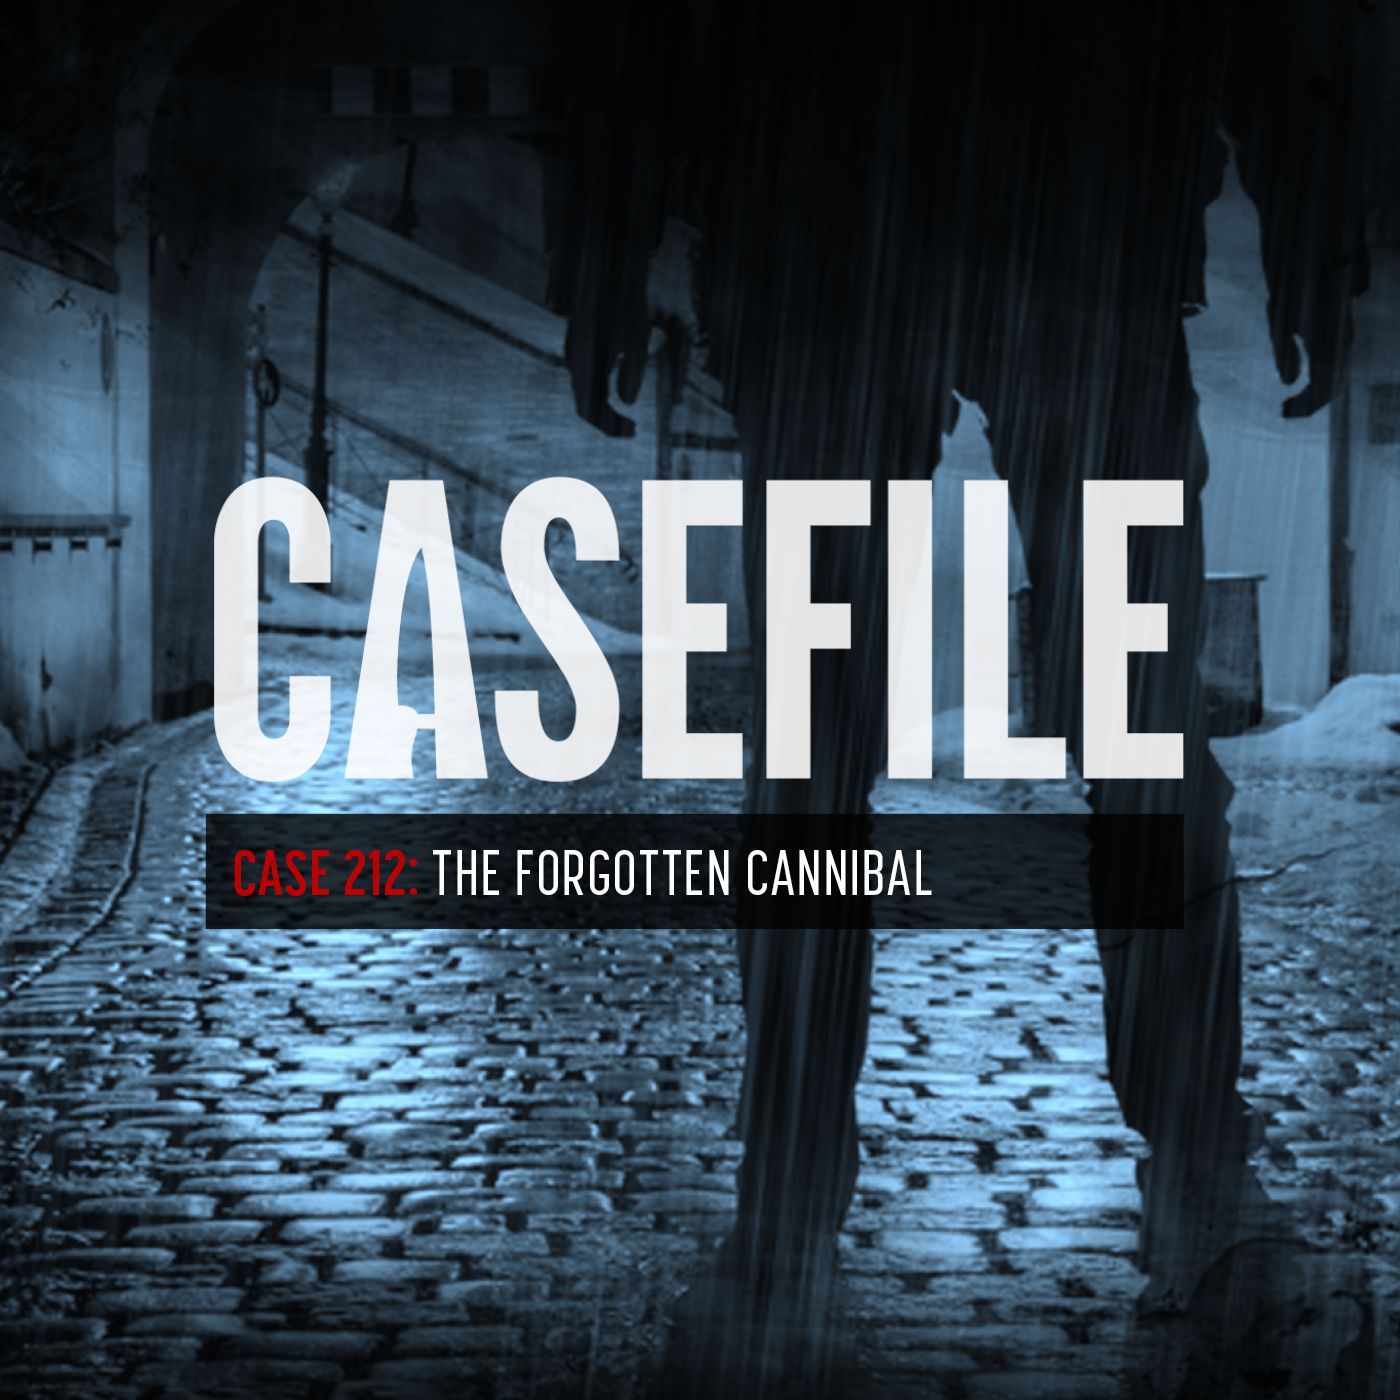 Case 212: The Forgotten Cannibal